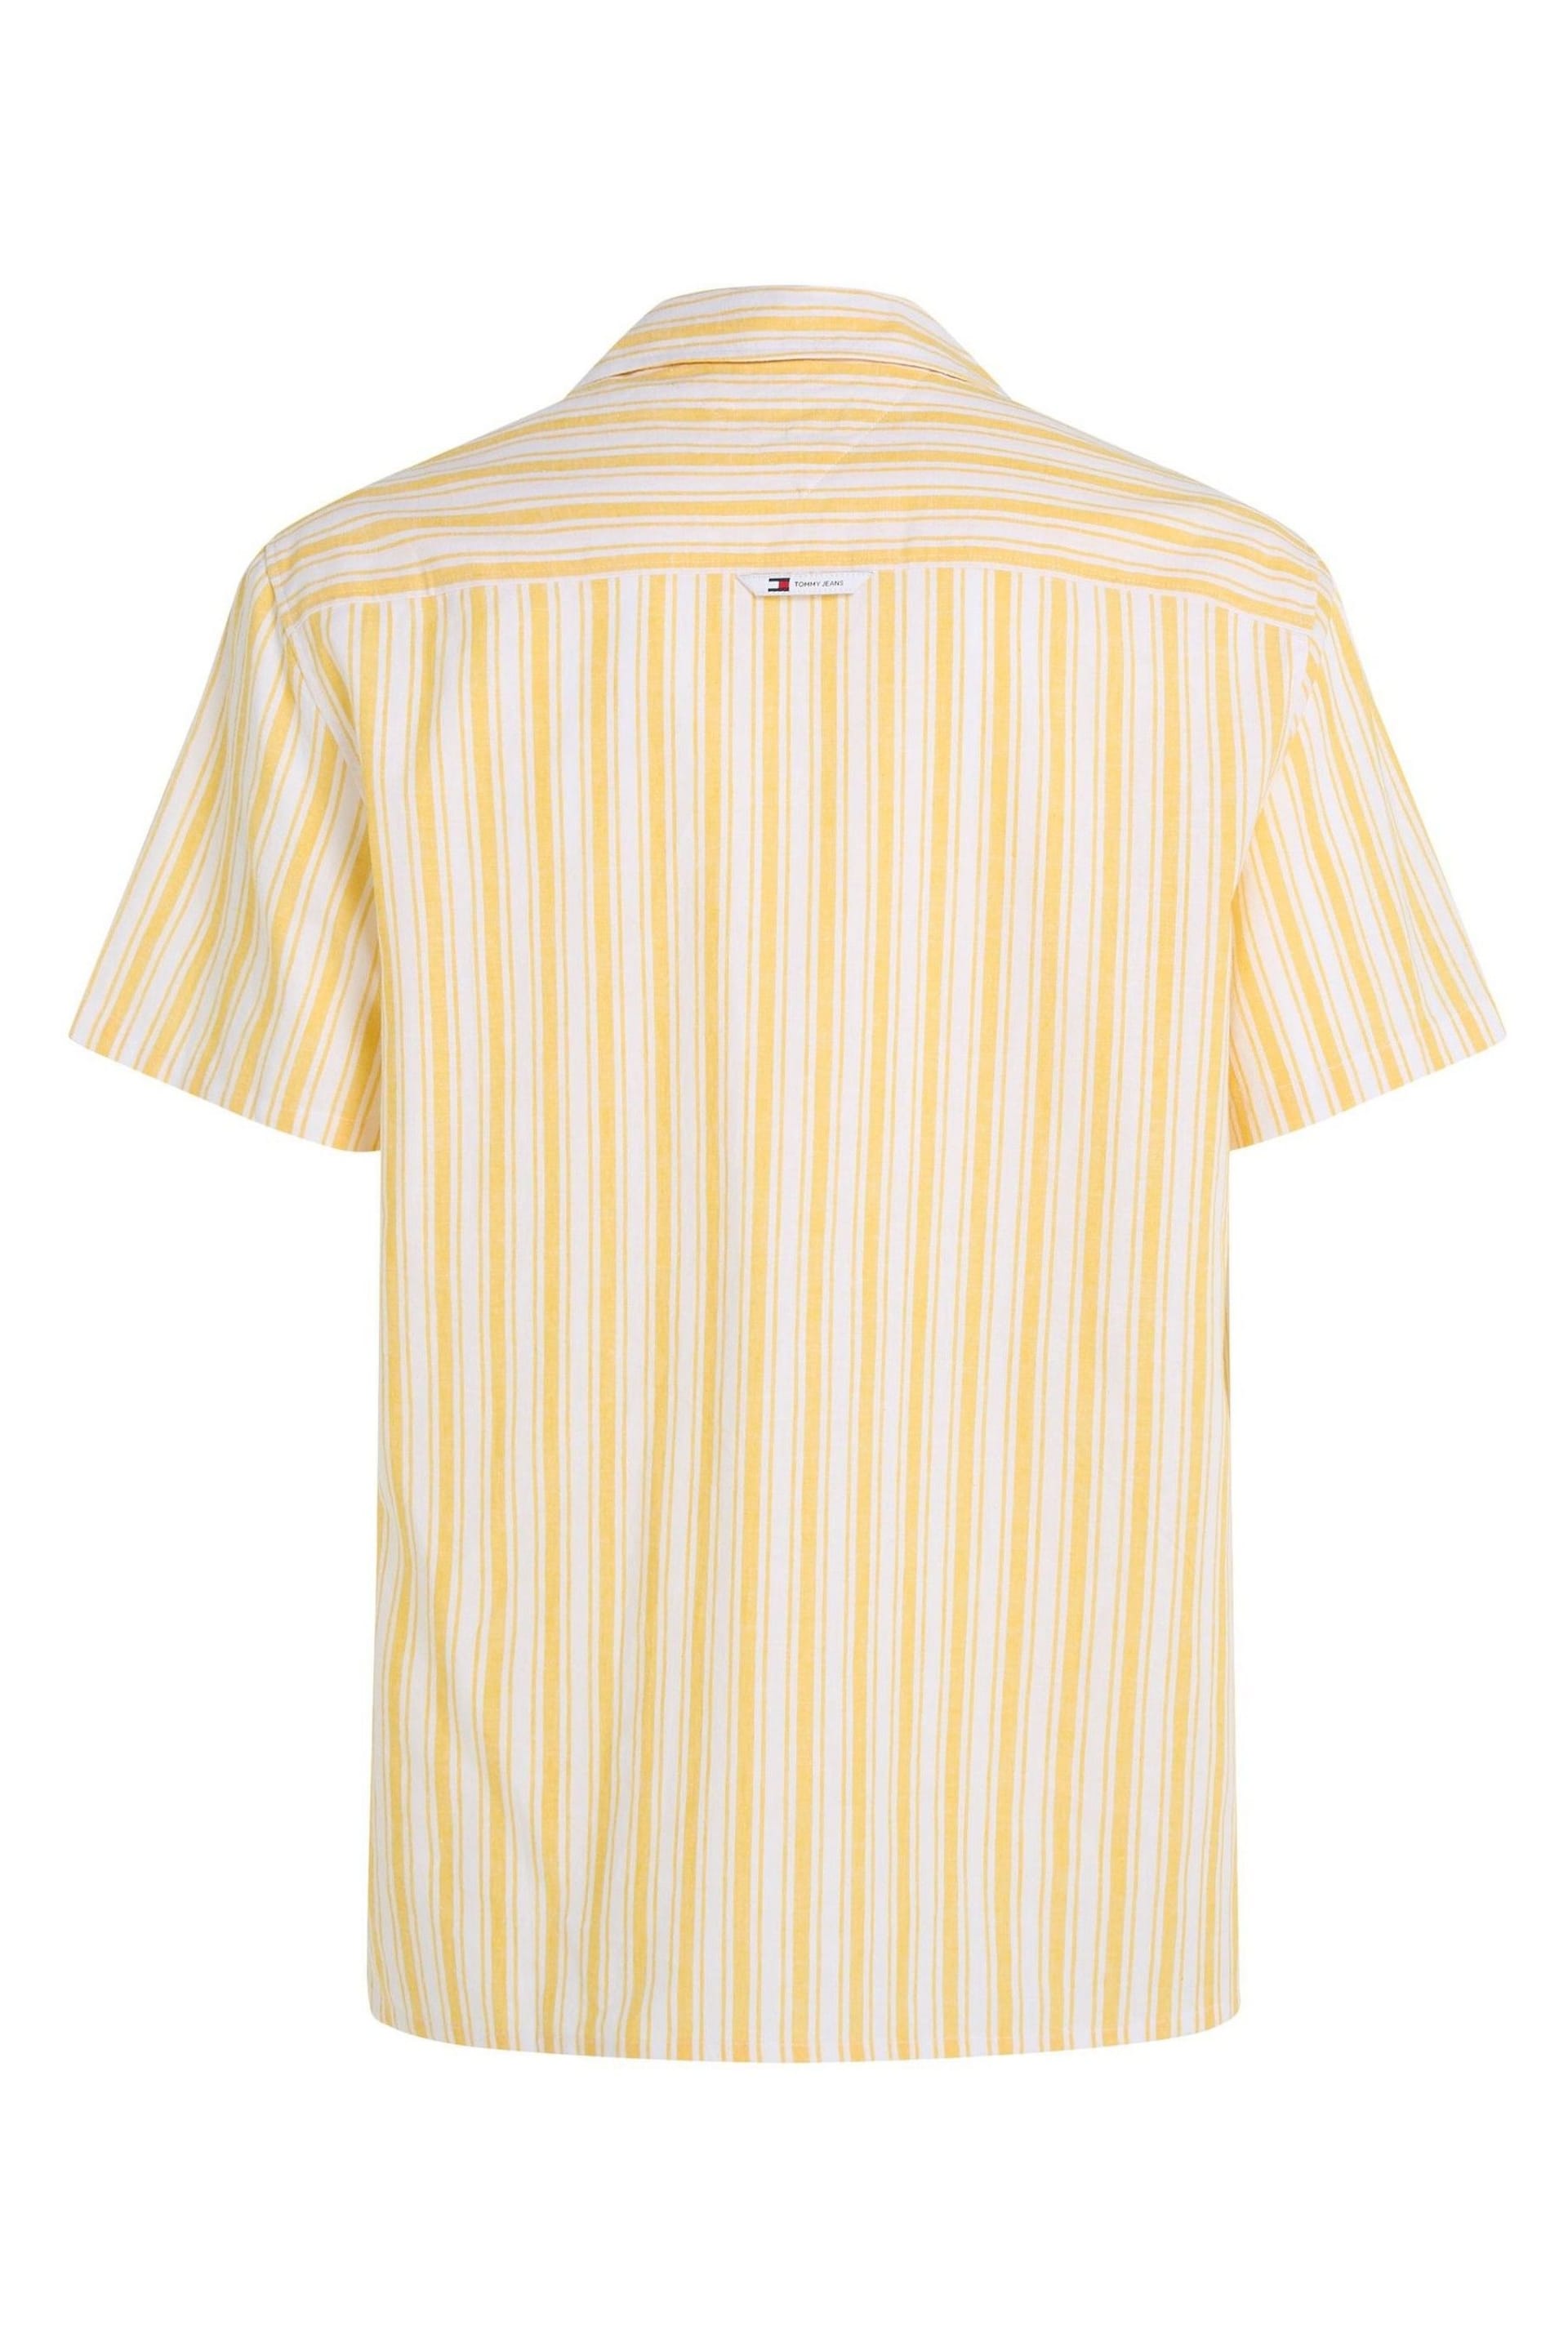 Tommy Jeans Stripe Linen Shirt - Image 5 of 6